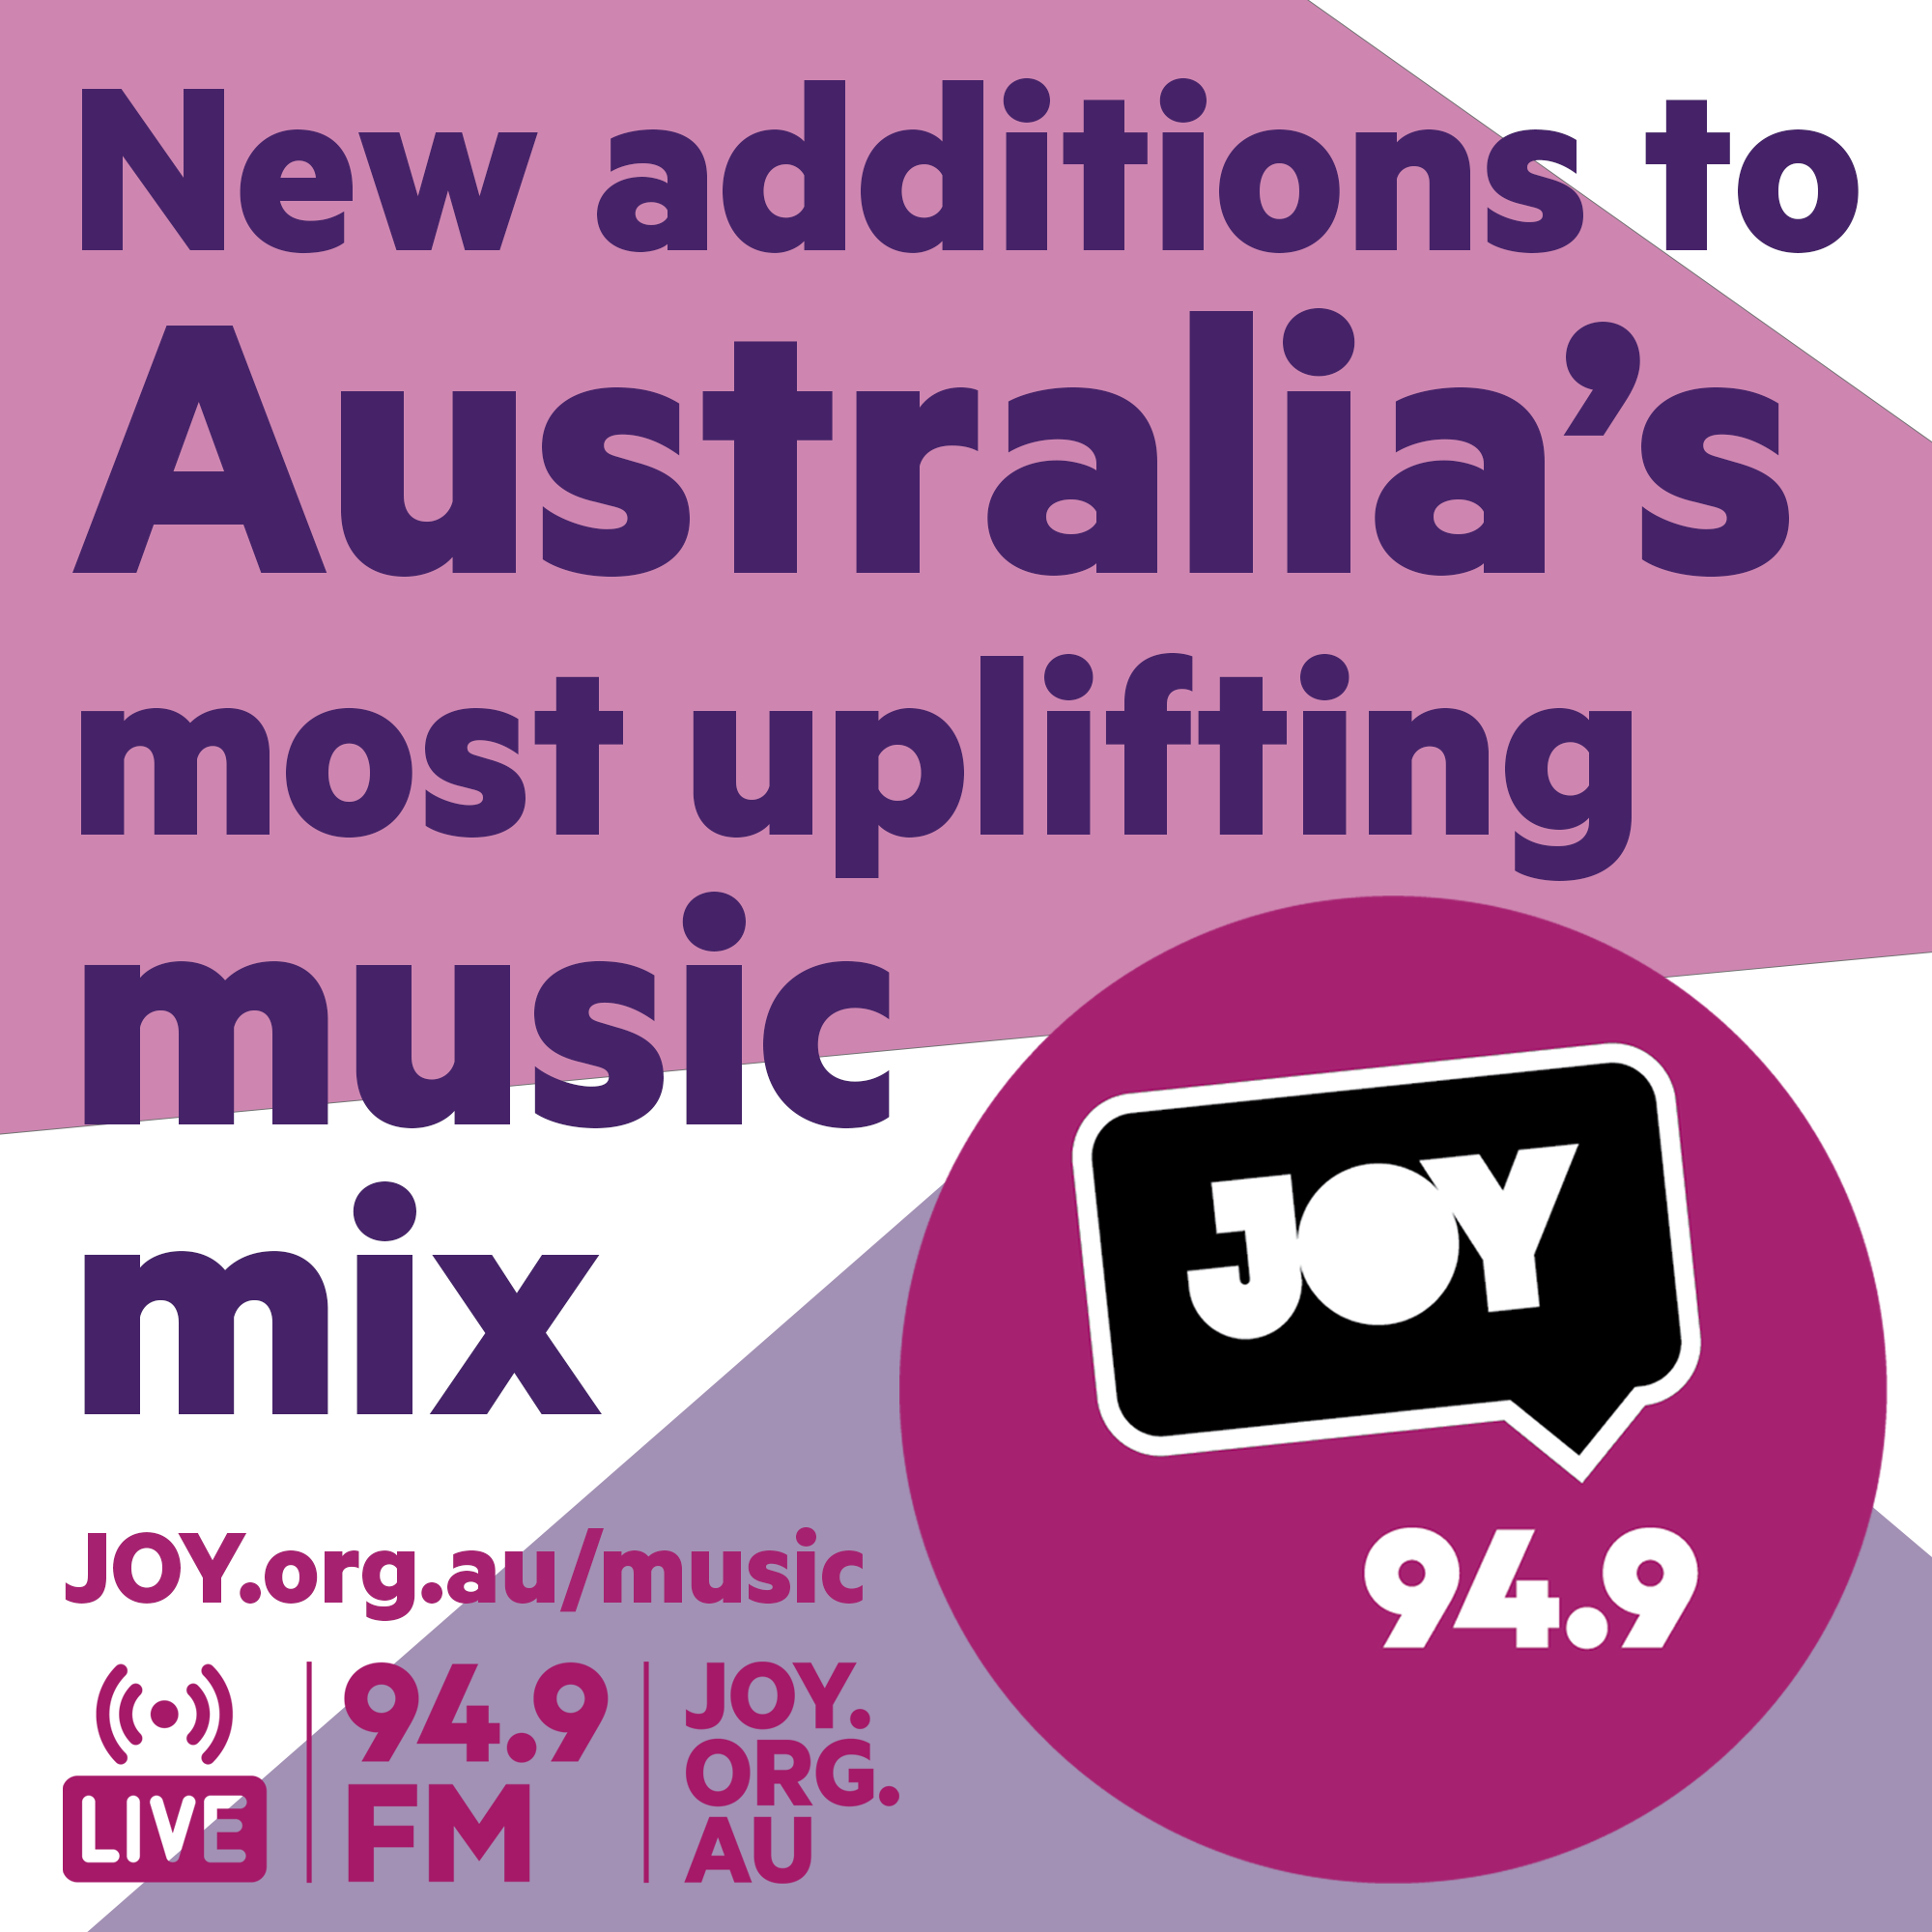 The newest songs to Australia’s most uplifting music mix: 20 July 2022